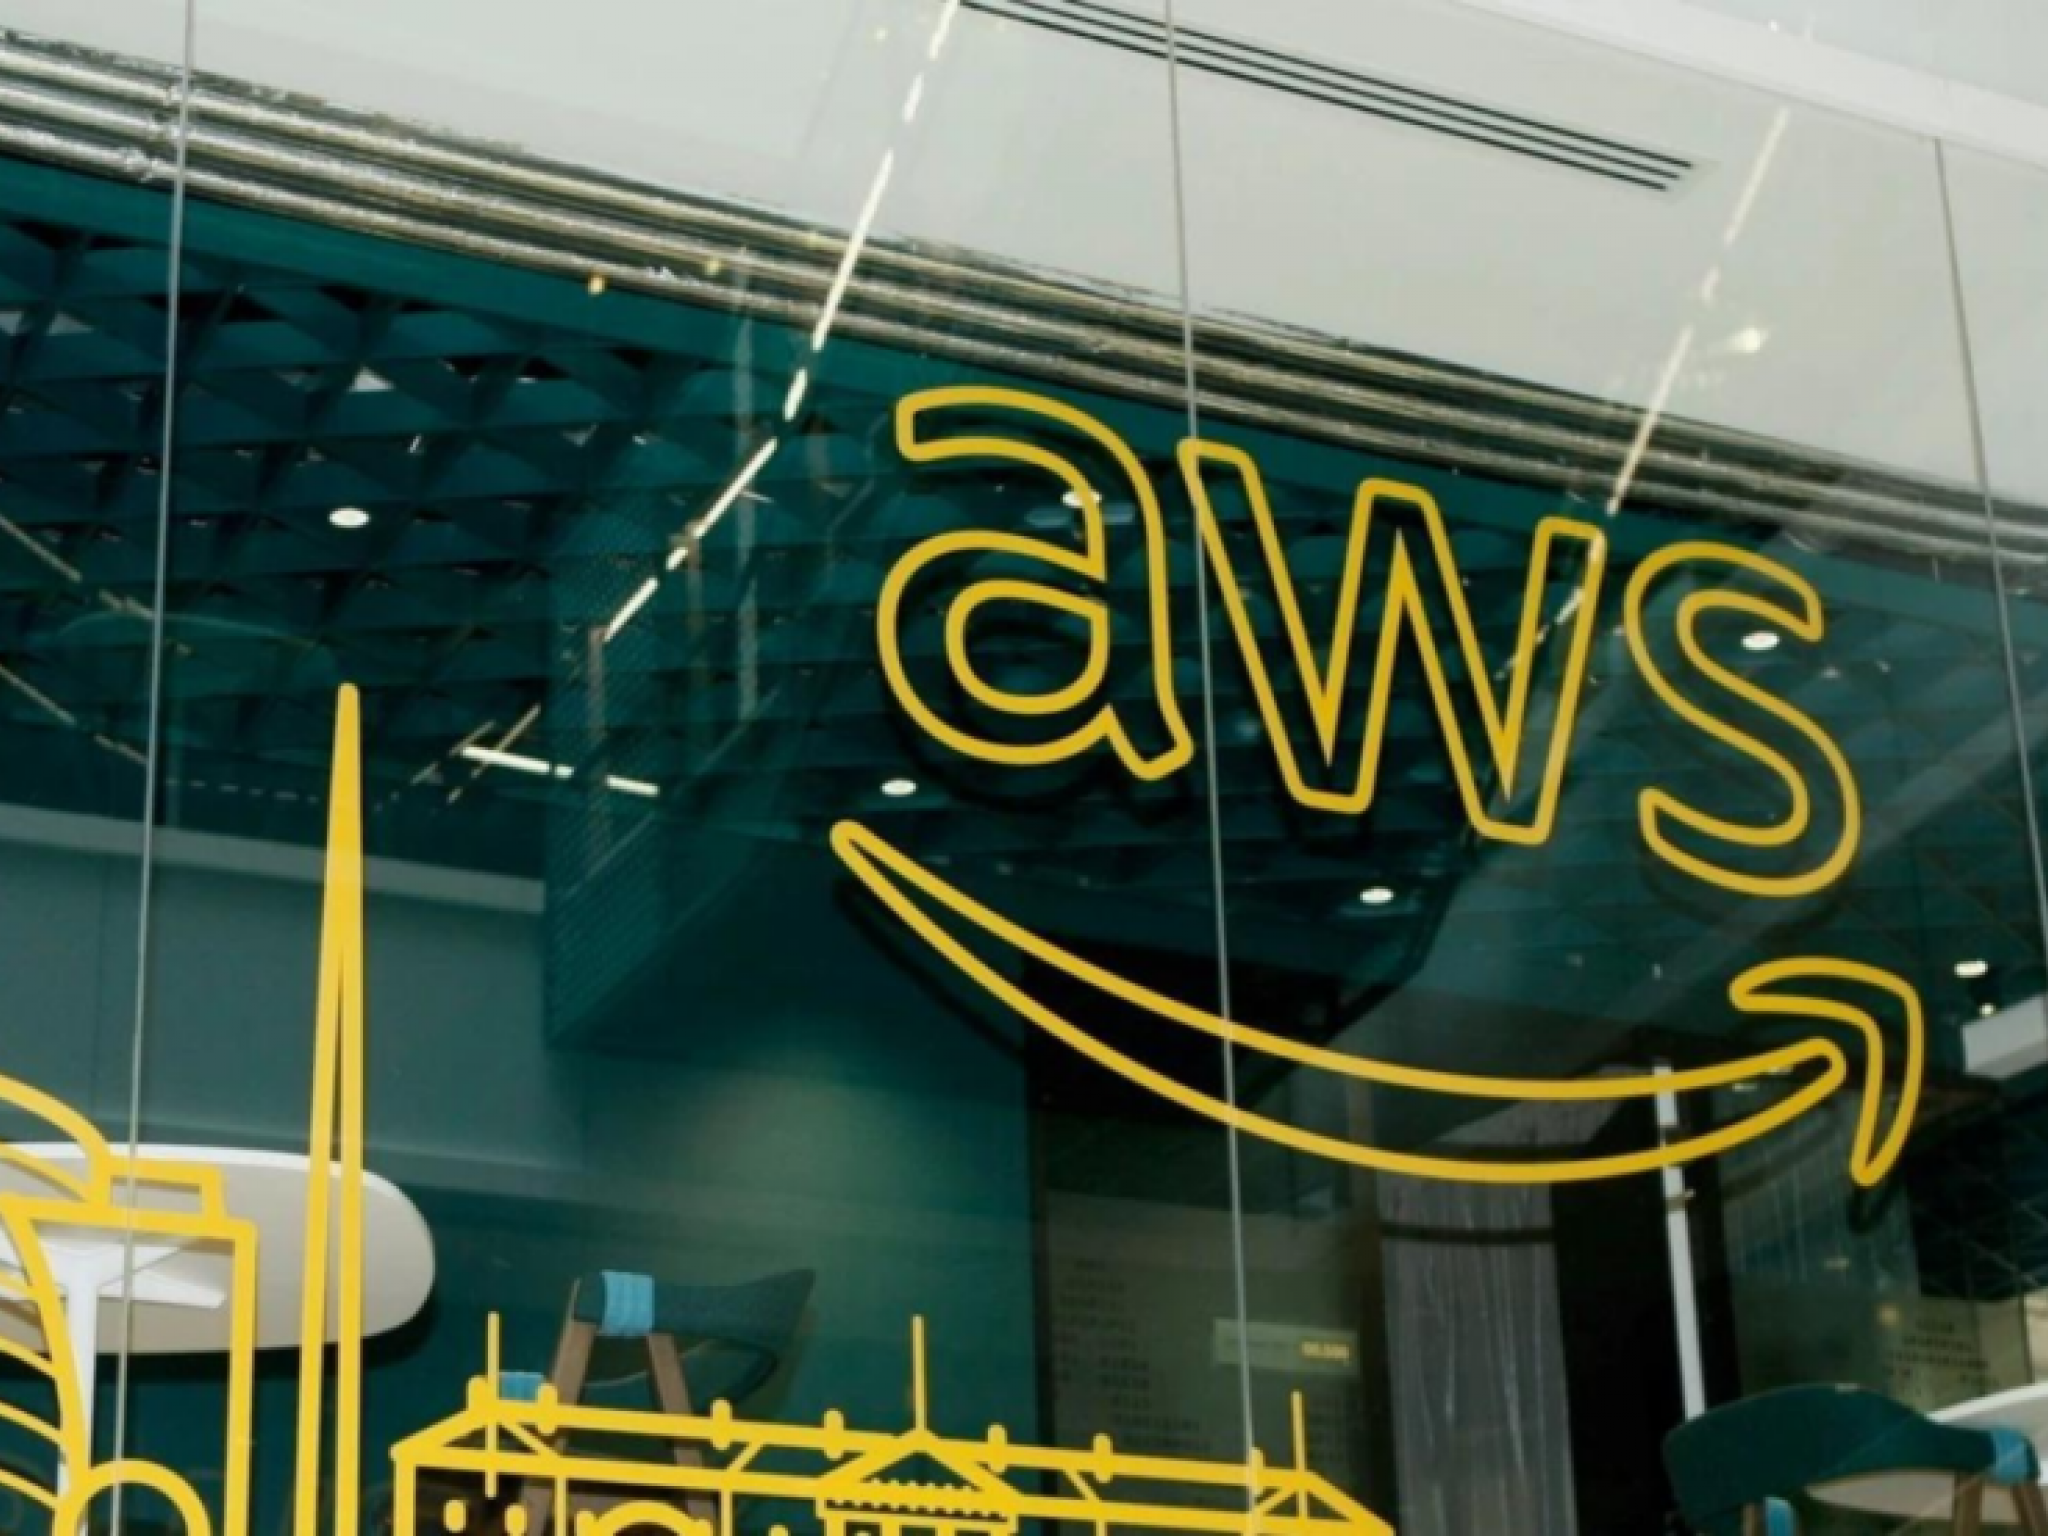  amazons-earnings-poised-for-boost-from-aws-ads-and-retail-innovation-bofa-analyst 